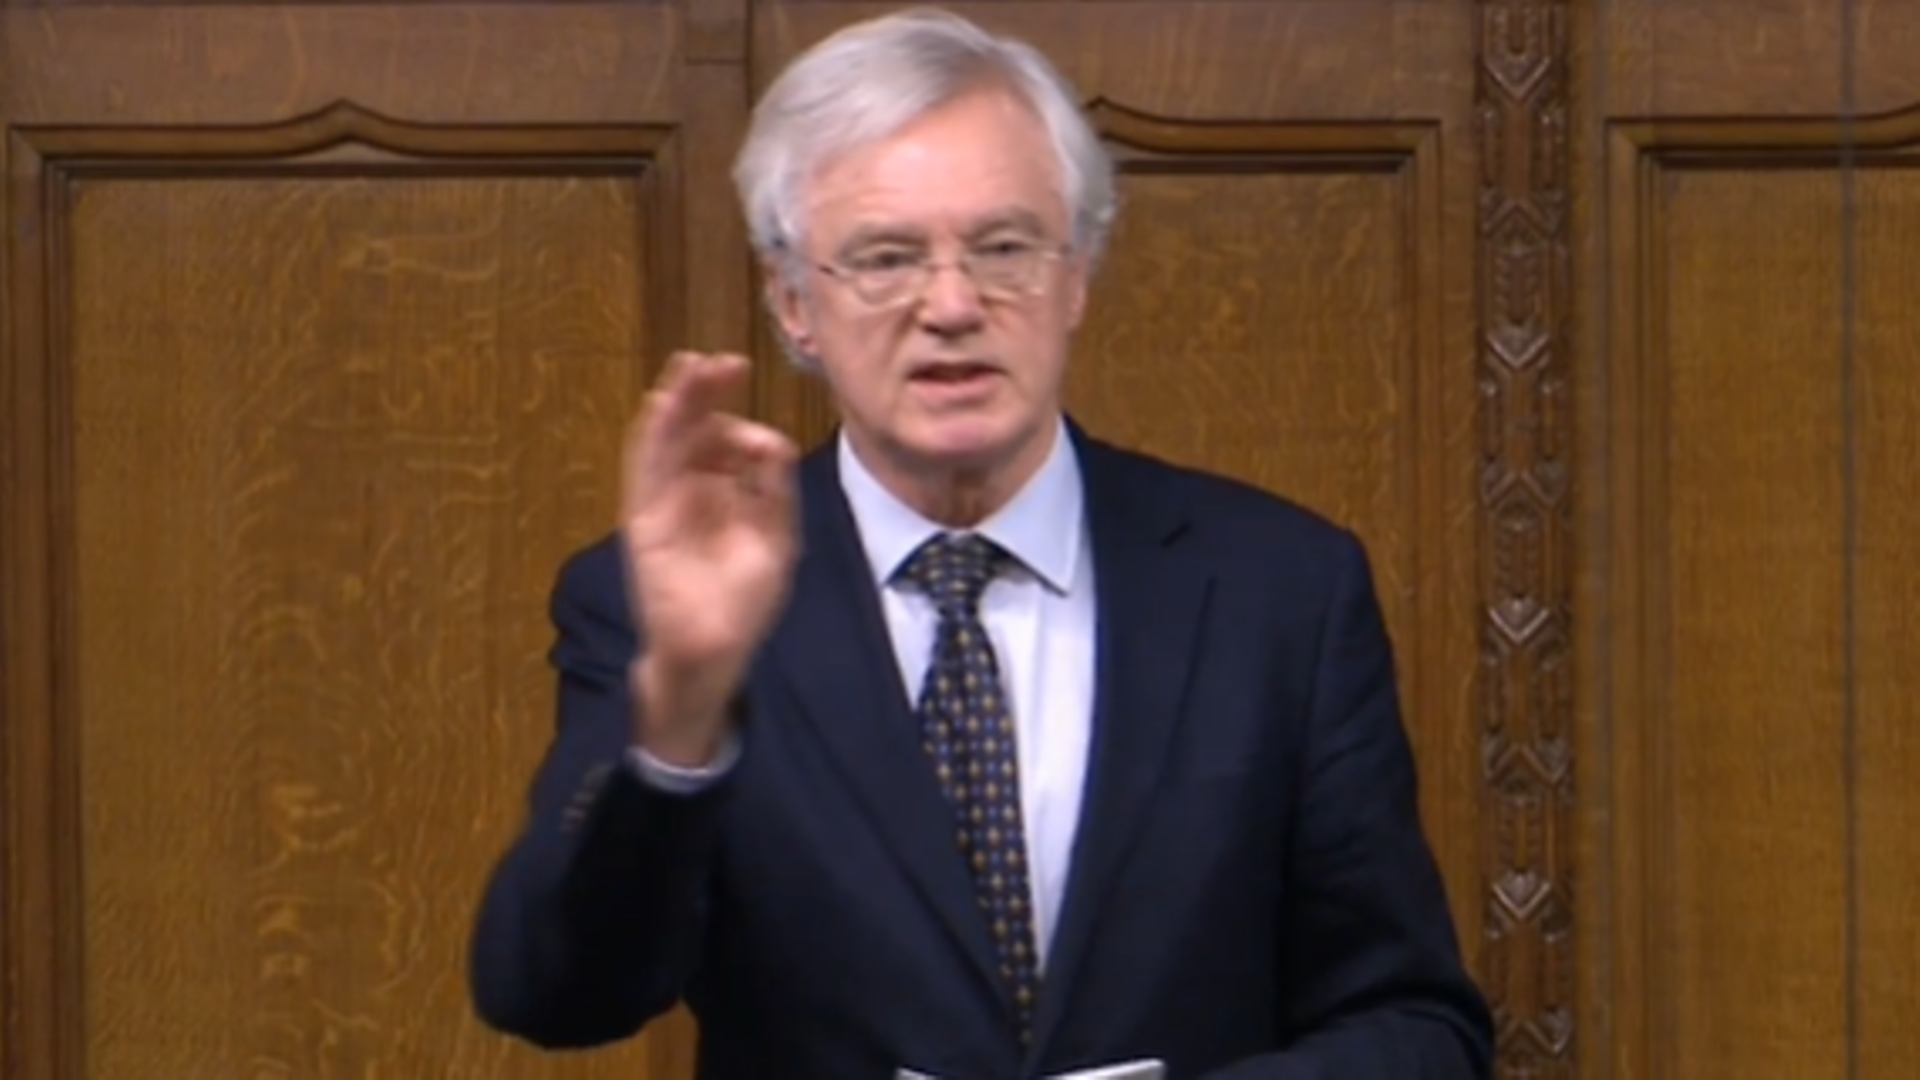 David Davis in the House of Commons - Credit: Parliament Live